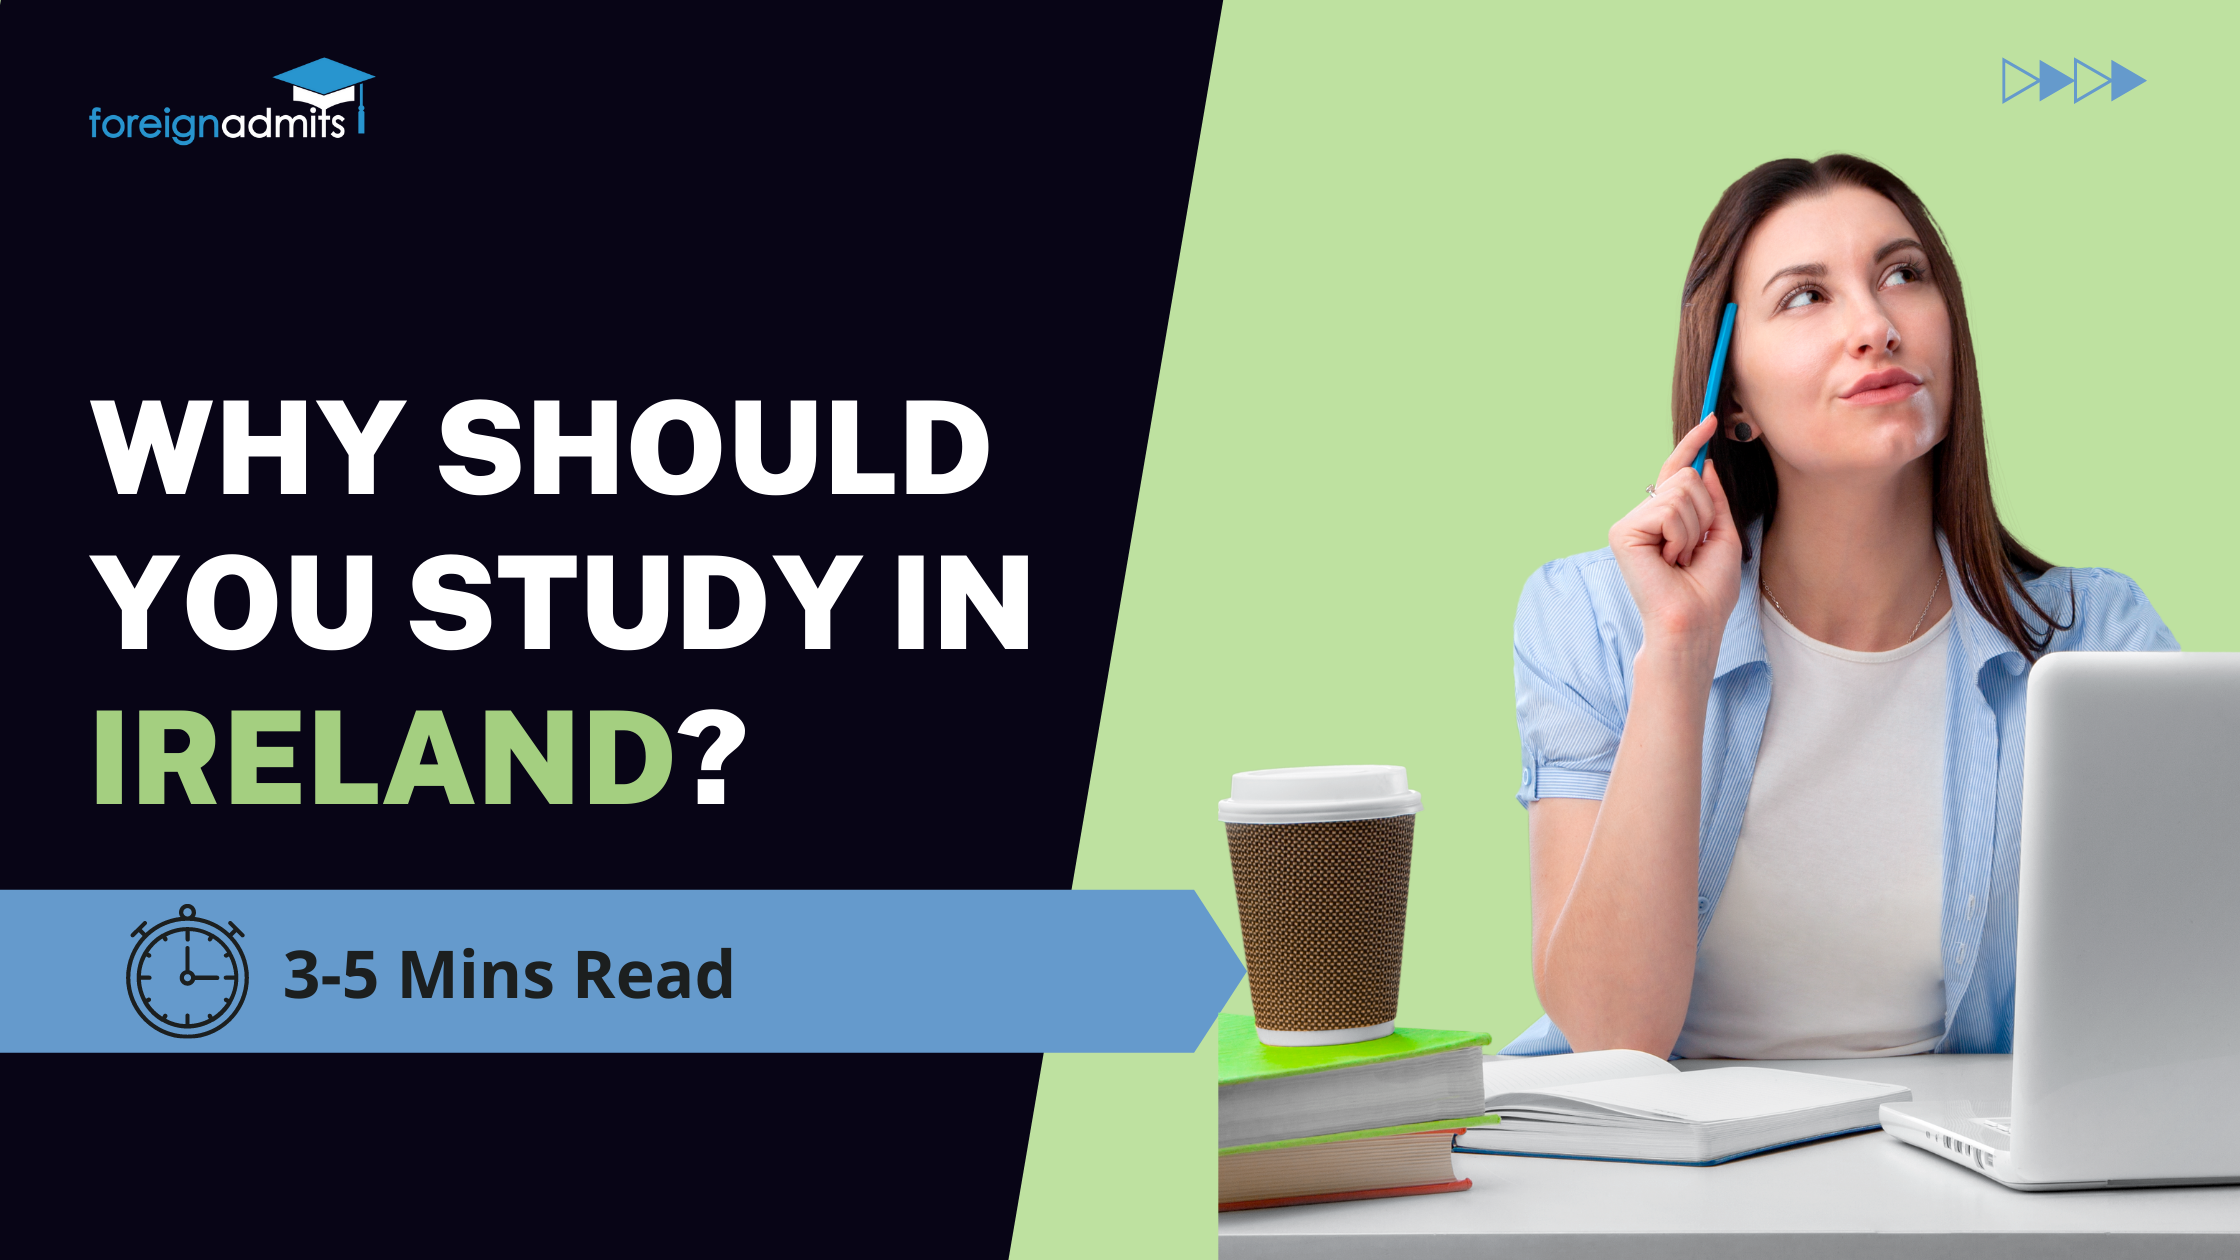 Why should you study in Ireland?